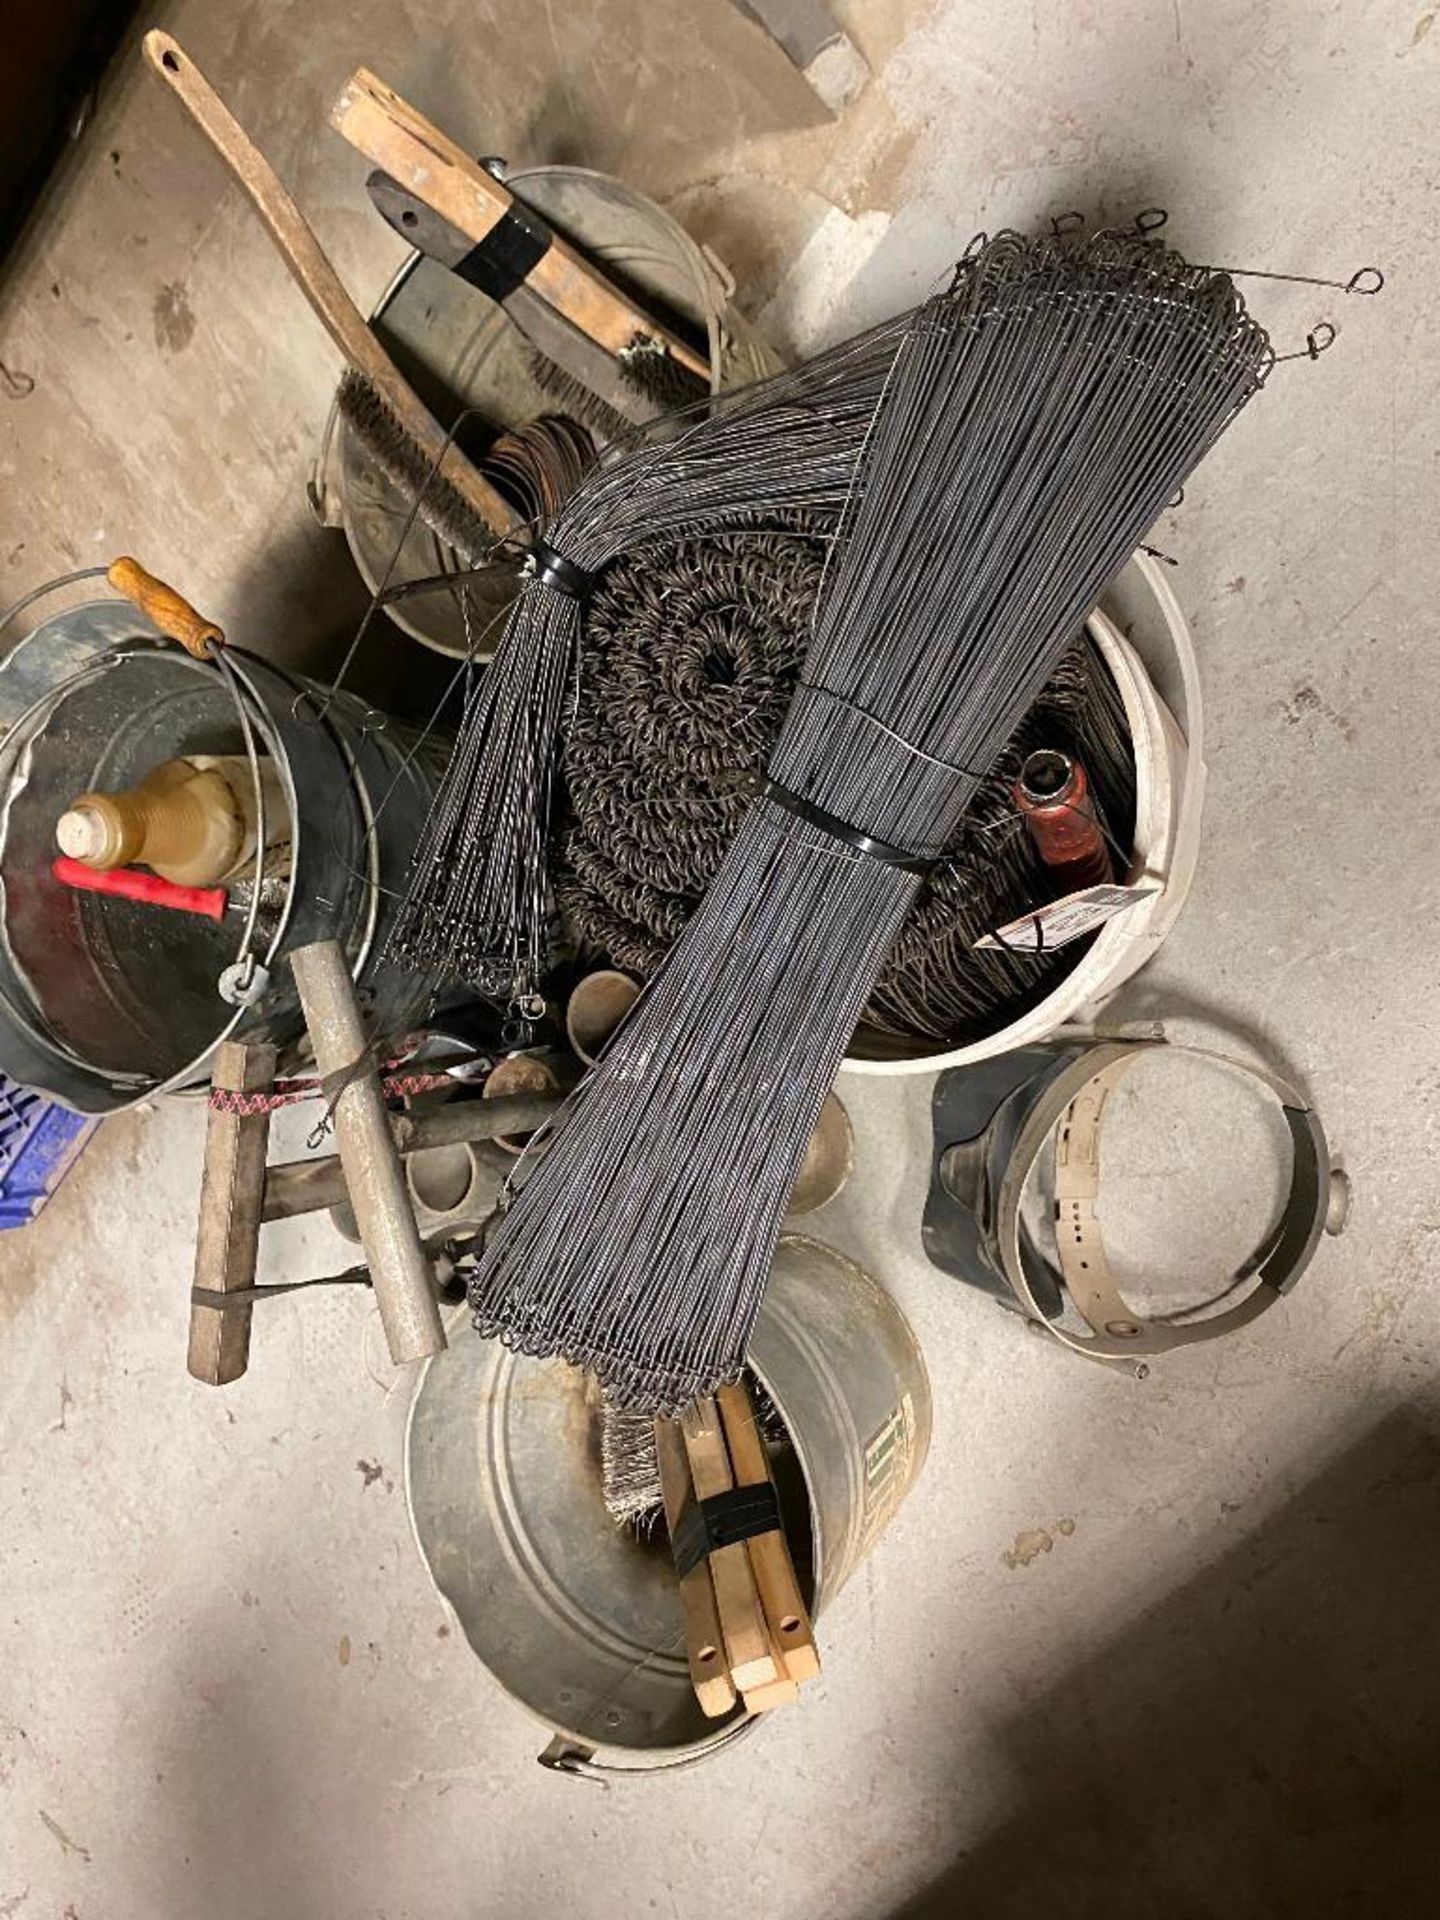 Lot of Asst. Loop Tie Wire, Wire Brushes, Haywire, Rod Holder, etc. - Image 6 of 6